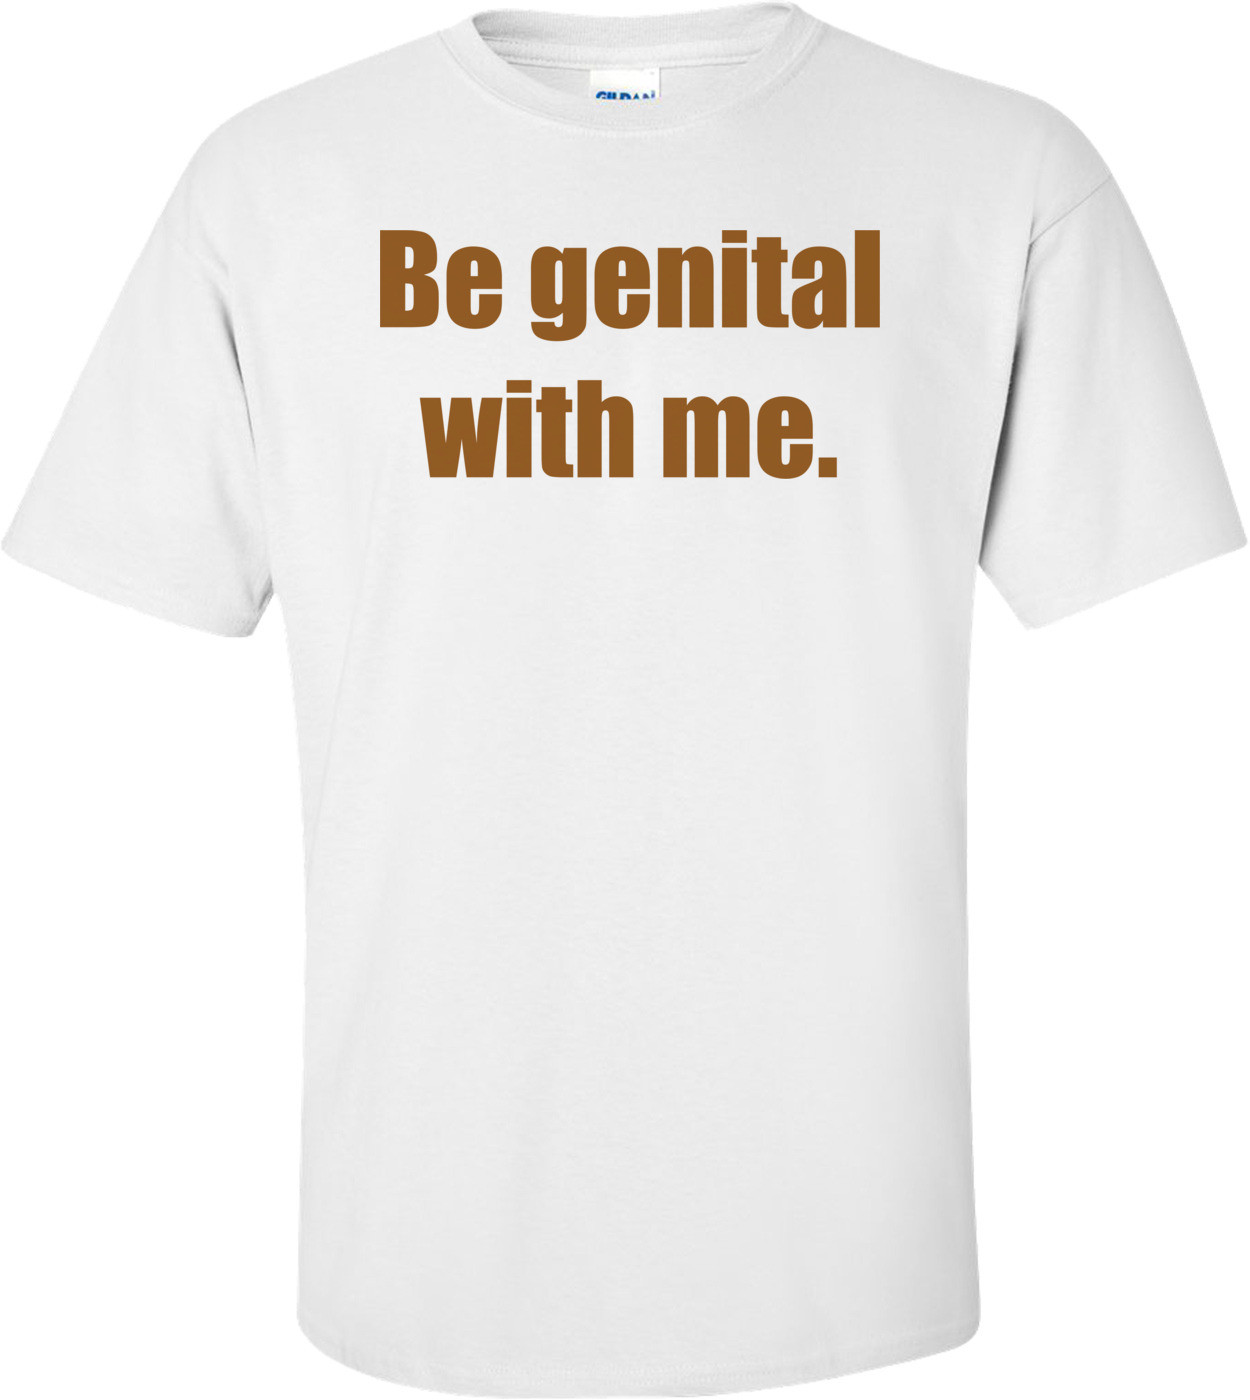 Be genital with me. Shirt